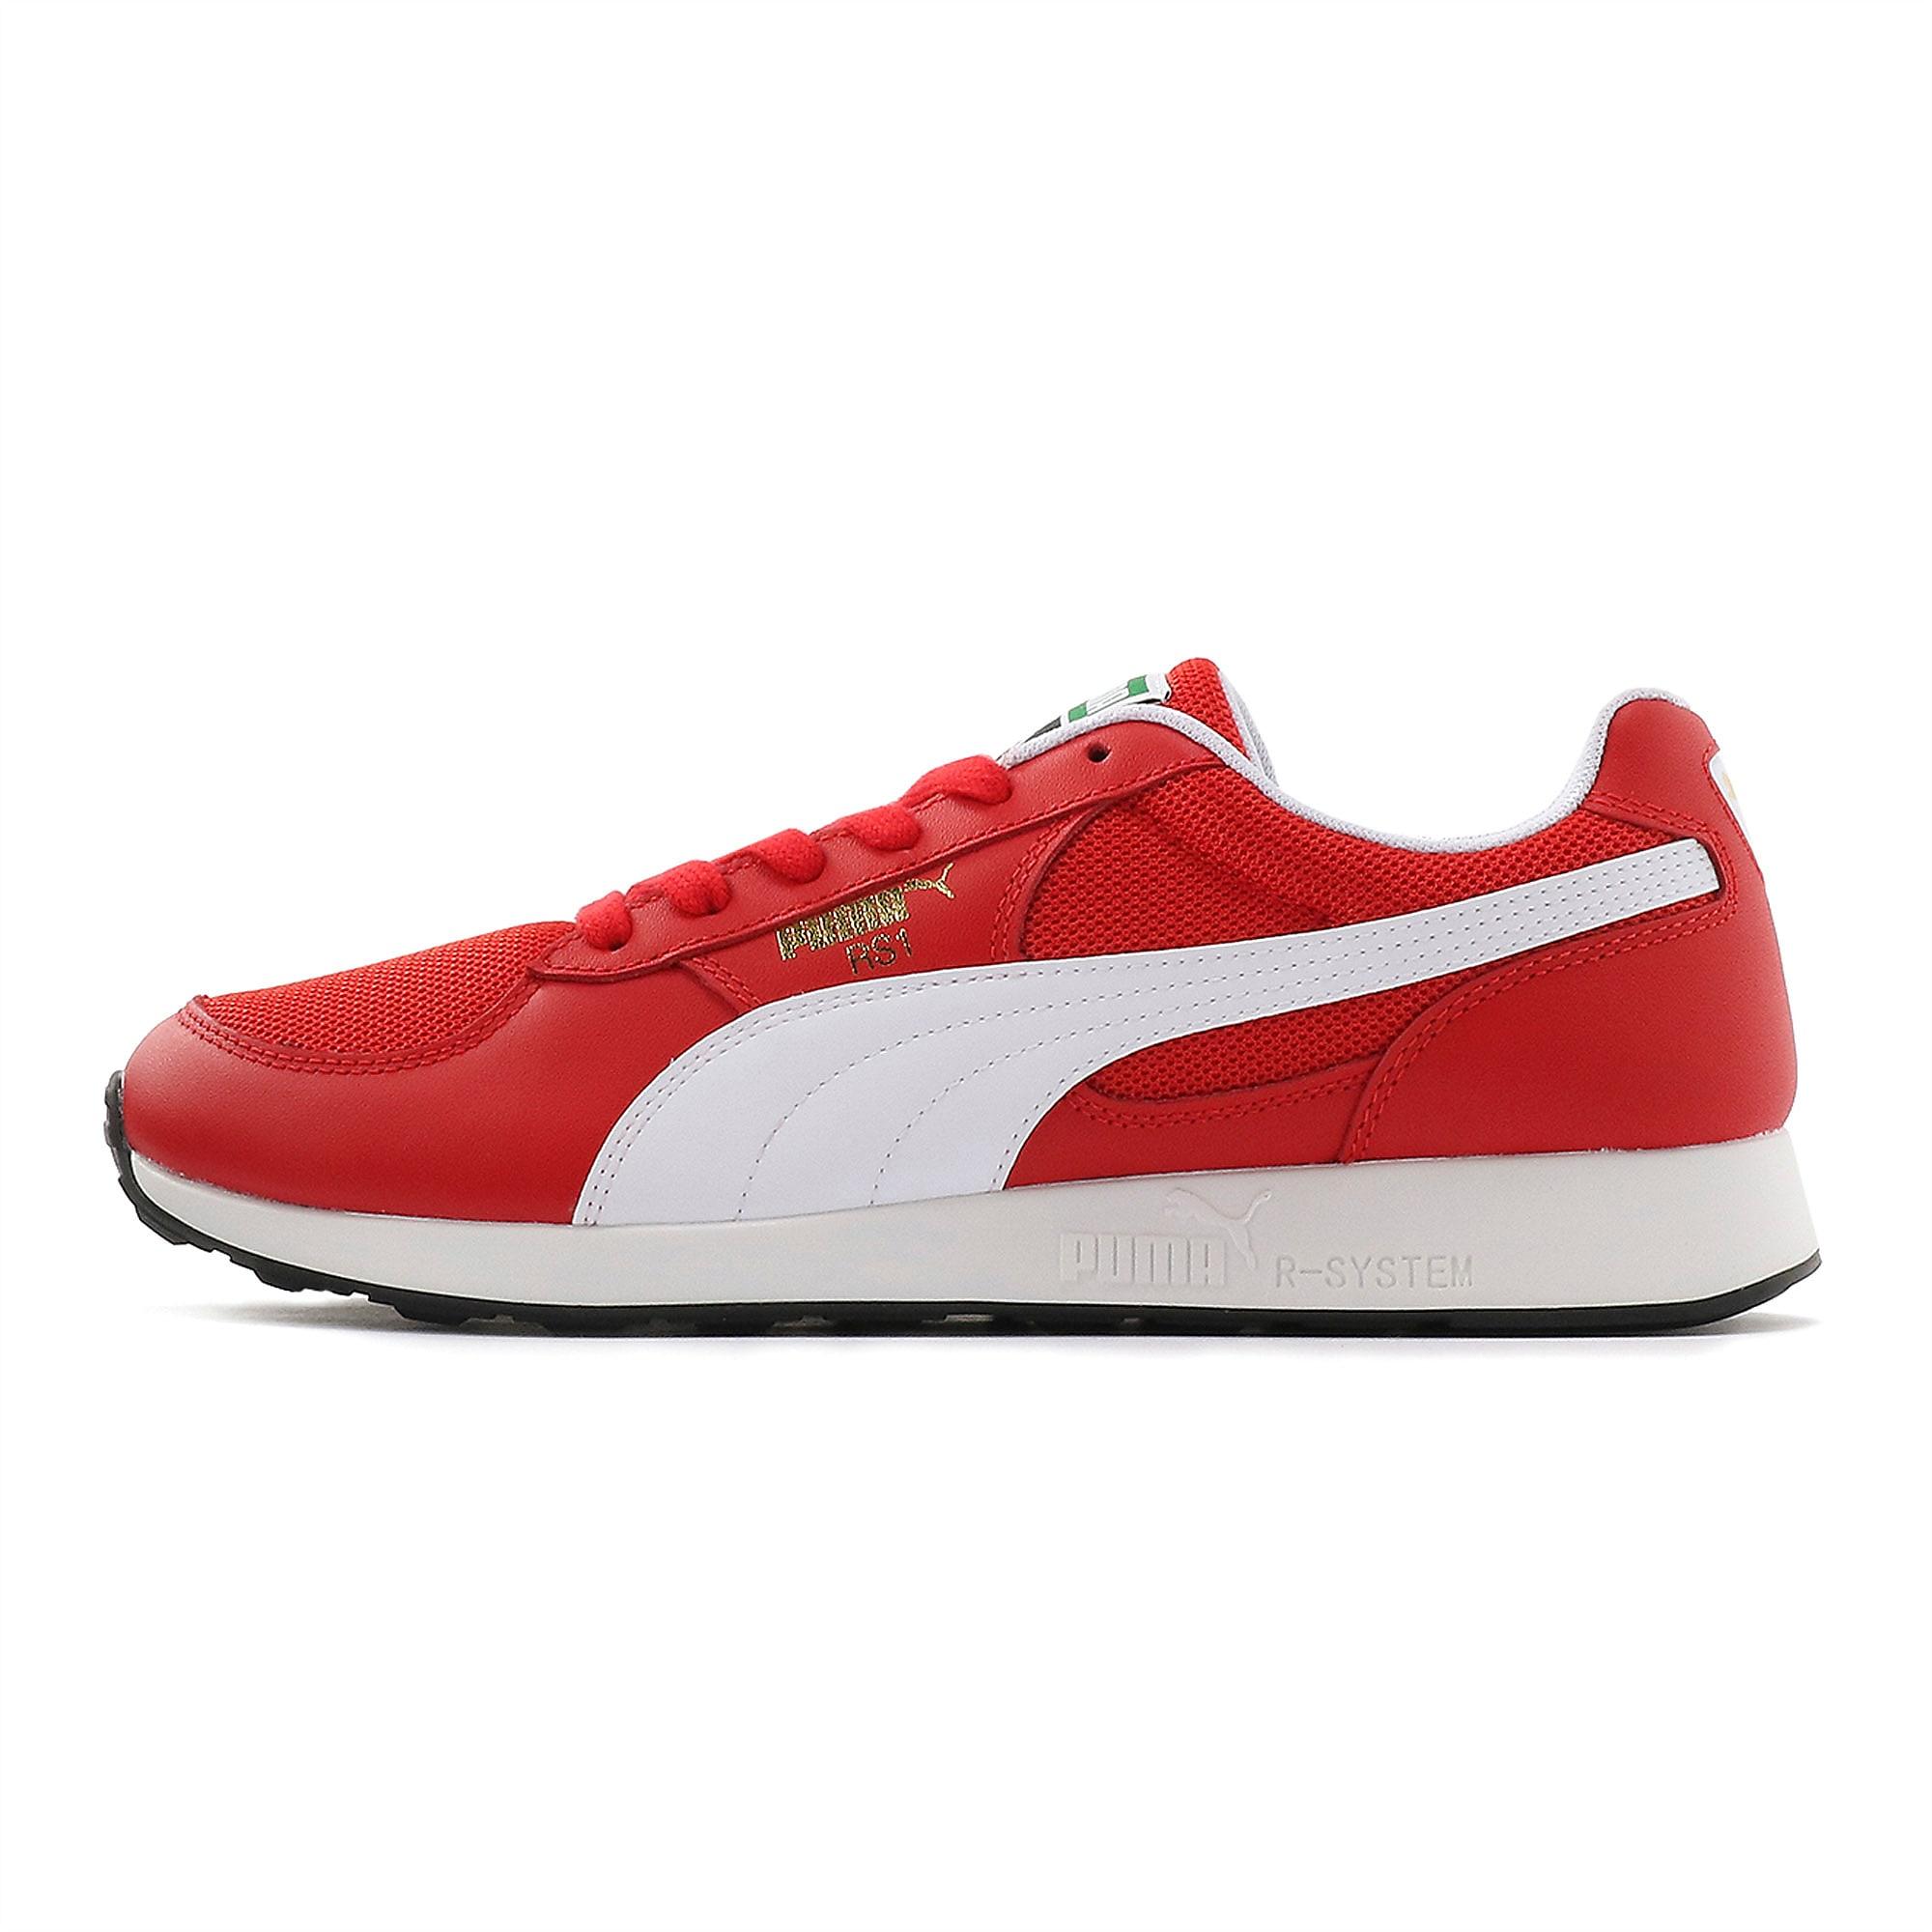 PUMA Lace Rs-1 Og Clone Sneakers in 03 (Red) for Men - Save 51% - Lyst